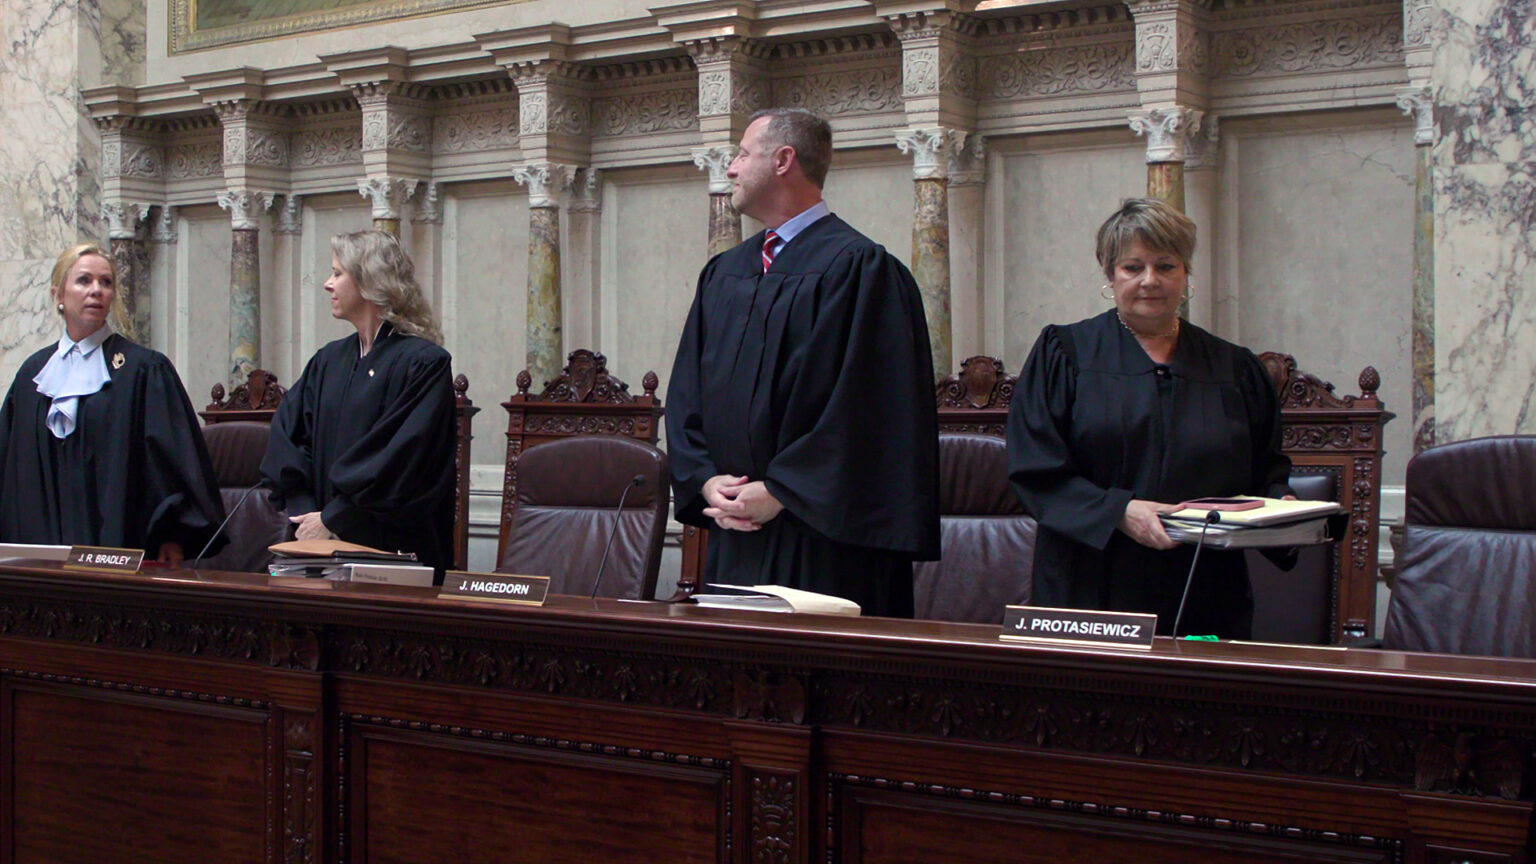 Annette Ziegler, Rebecca Bradley and Brian Hagedorn stand behind a judicial dais and look at each other while Janet Protasiewicz prepares to set down a binder with documents, with one row of high-backed leather chairs behind them and another row of high-backed wood and leather chairs in the background, in a room with marble masonry pillars.